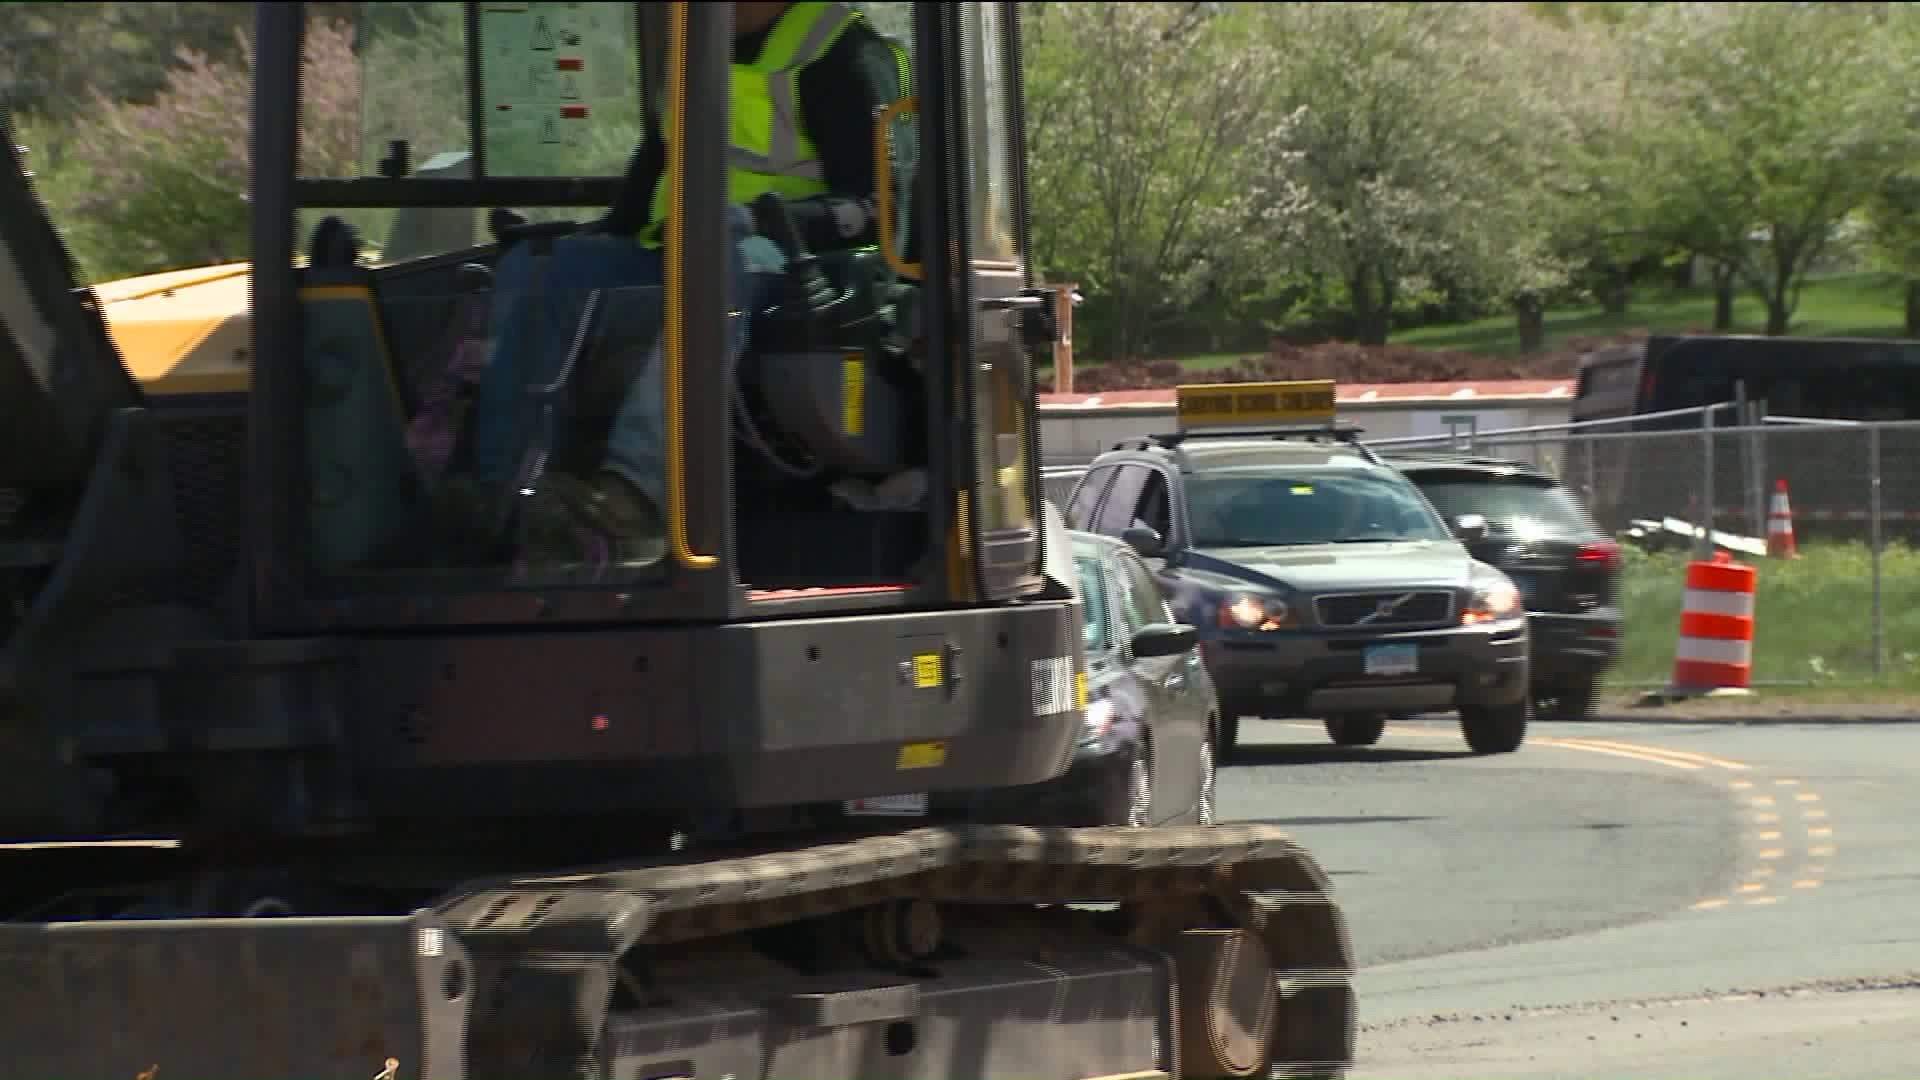 Construction continues amid heavy traffic on Route 4 in Farmington